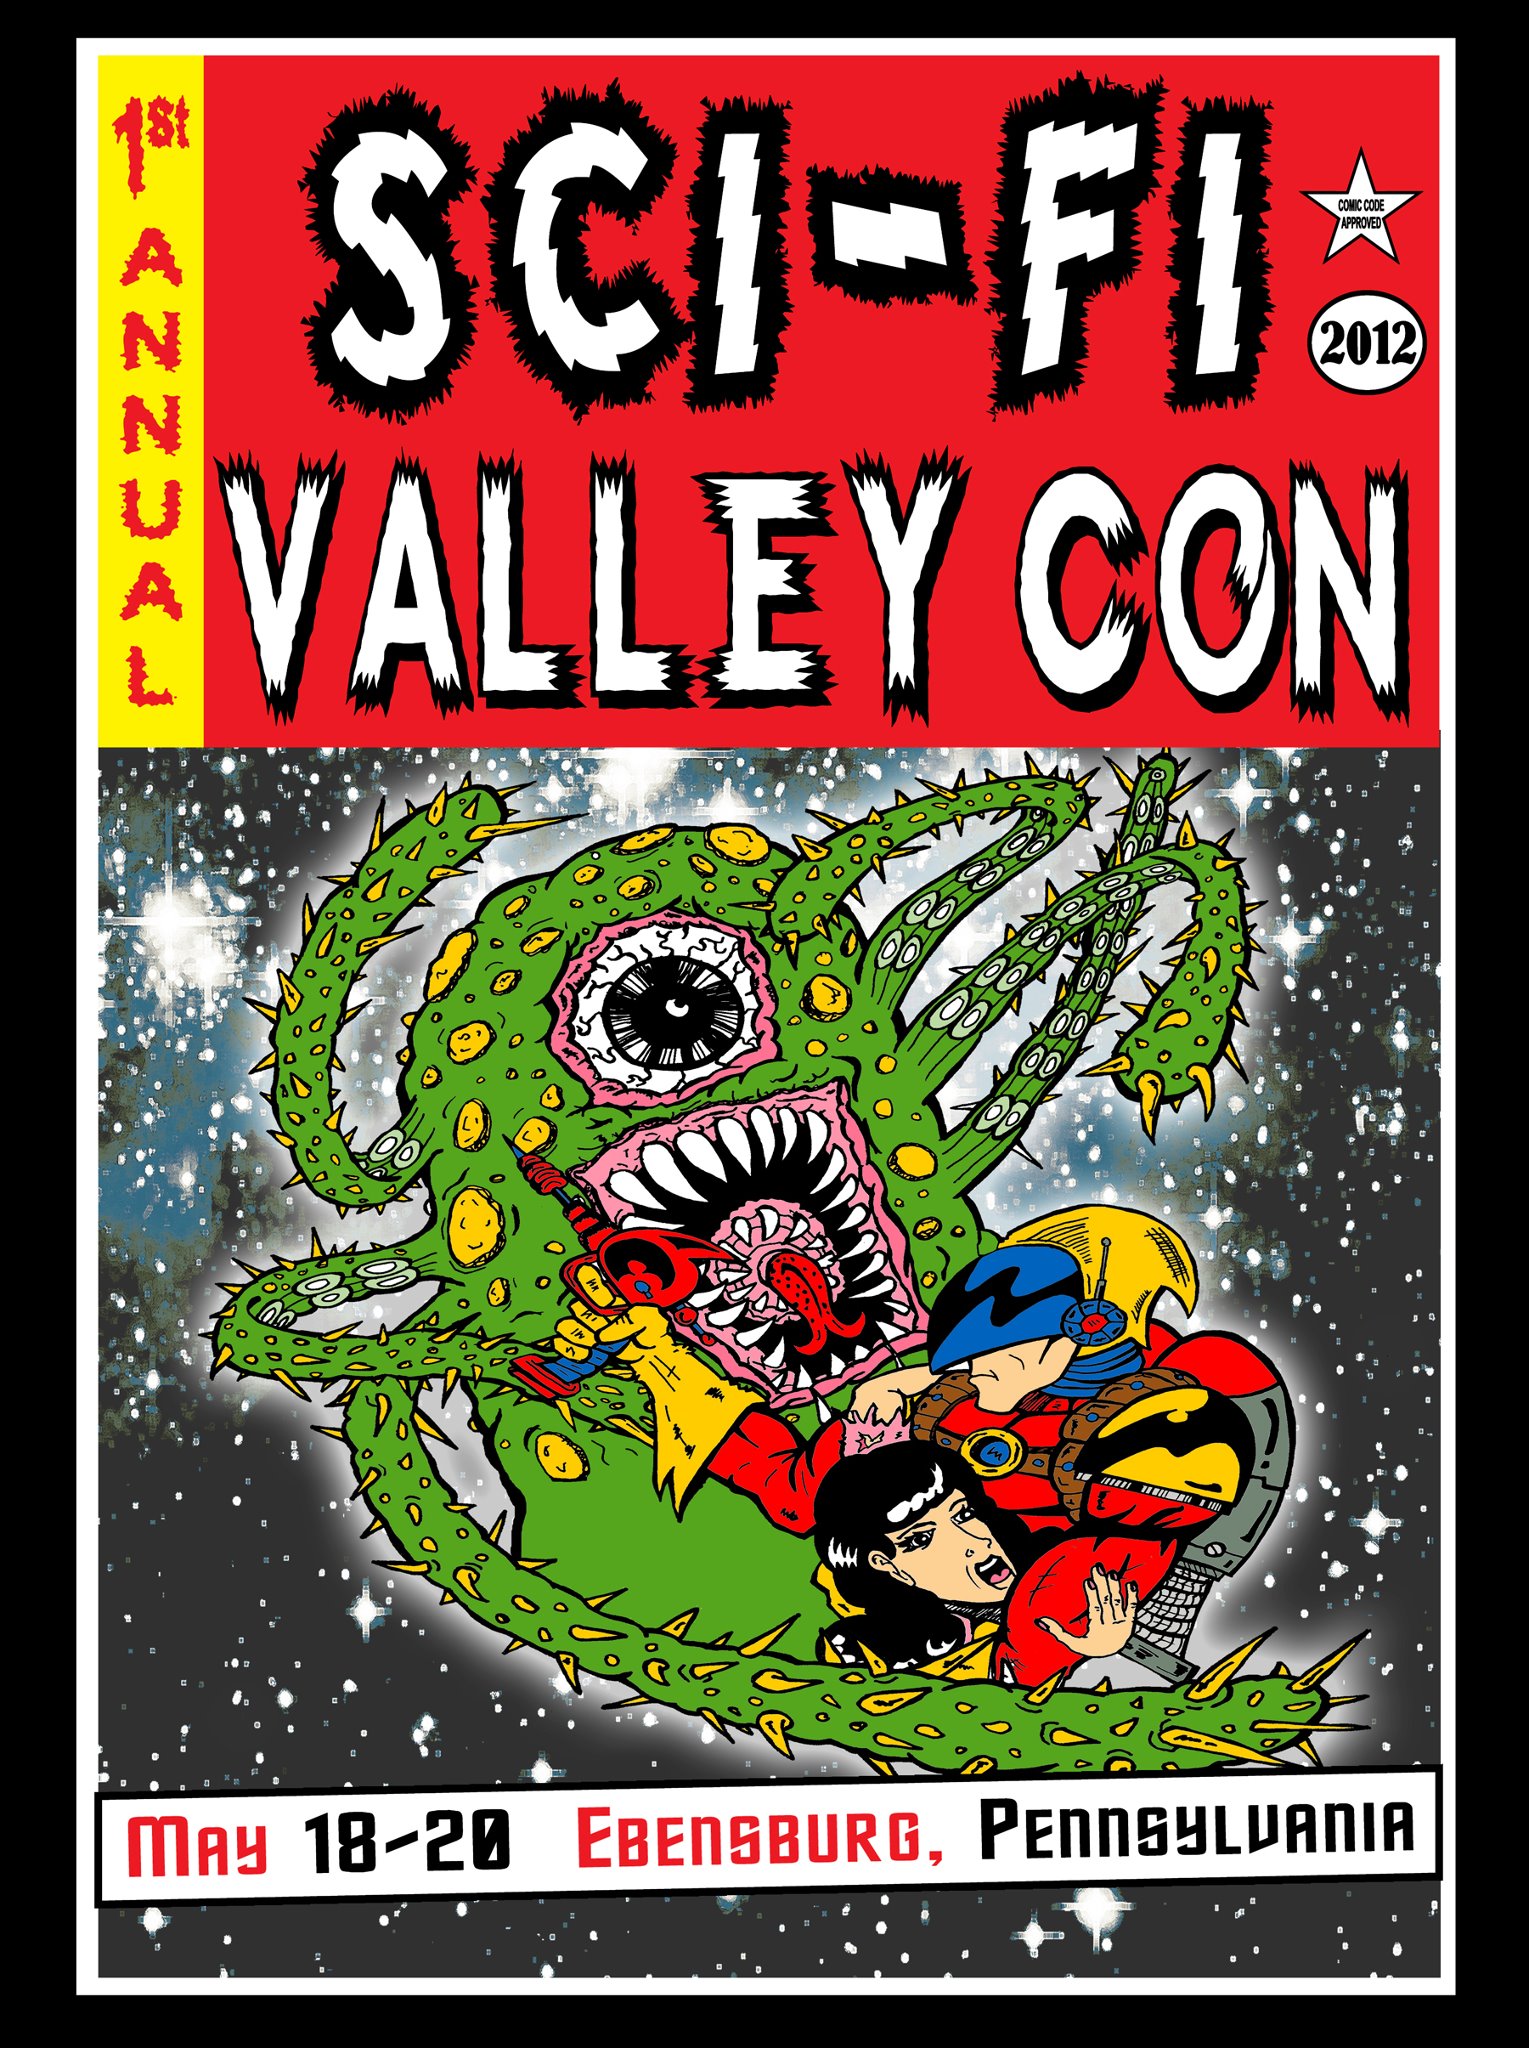 1st Annual Sci-Fi in the Valley Custom Art Auction to benefit Angels of East Africa